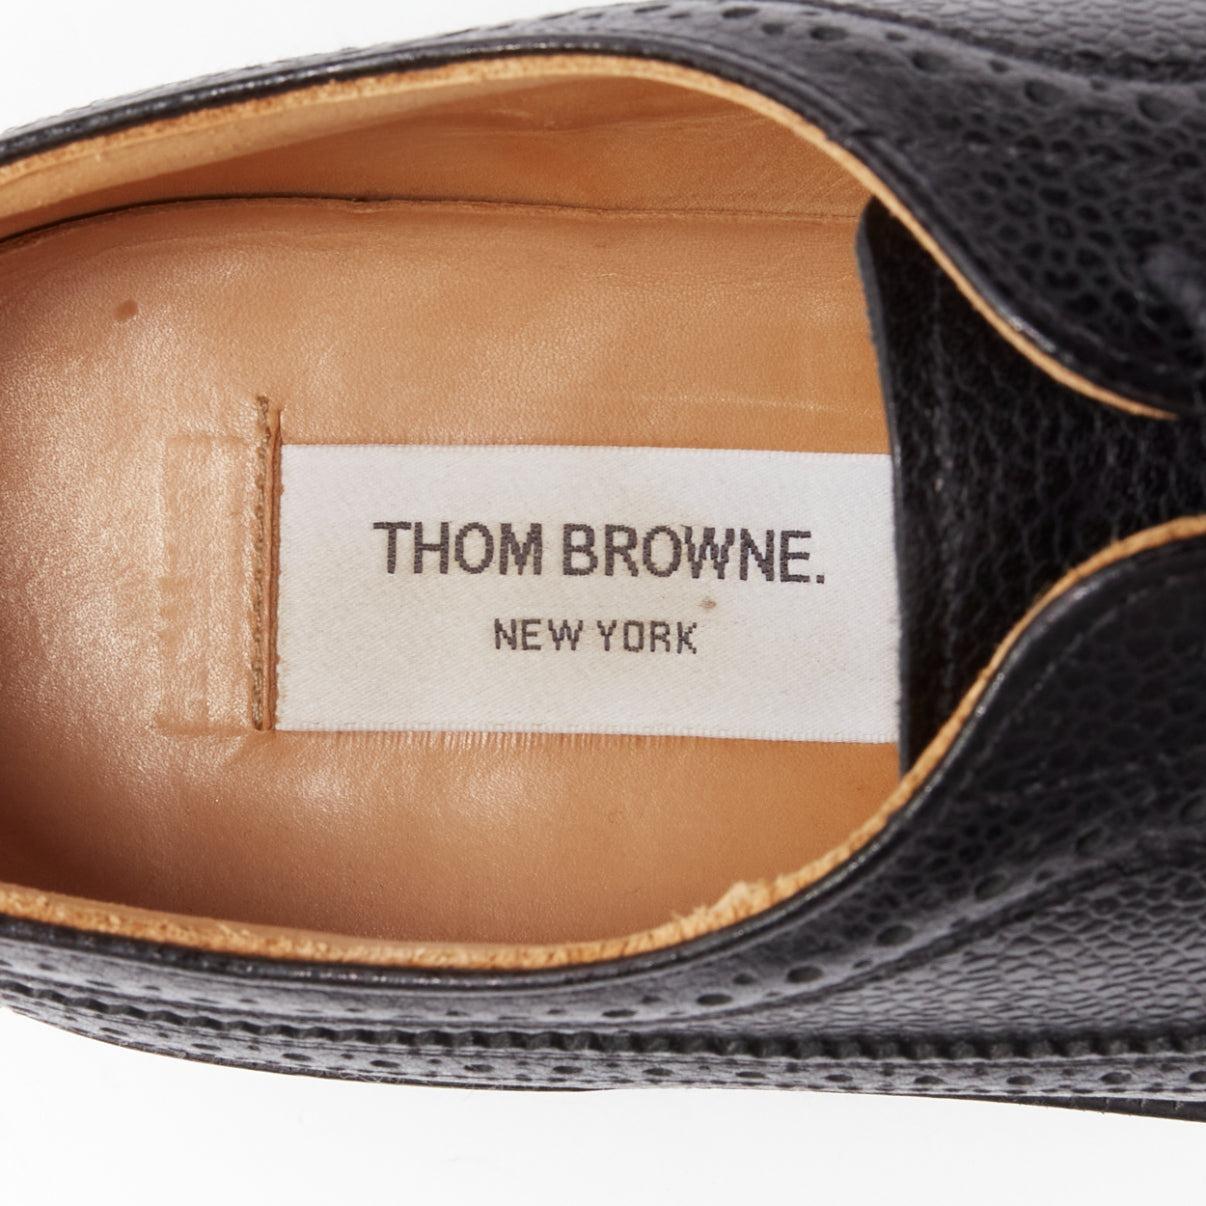 THOM BROWNE black grained leather perforated oxford brogue shoes EU42.5 For Sale 4